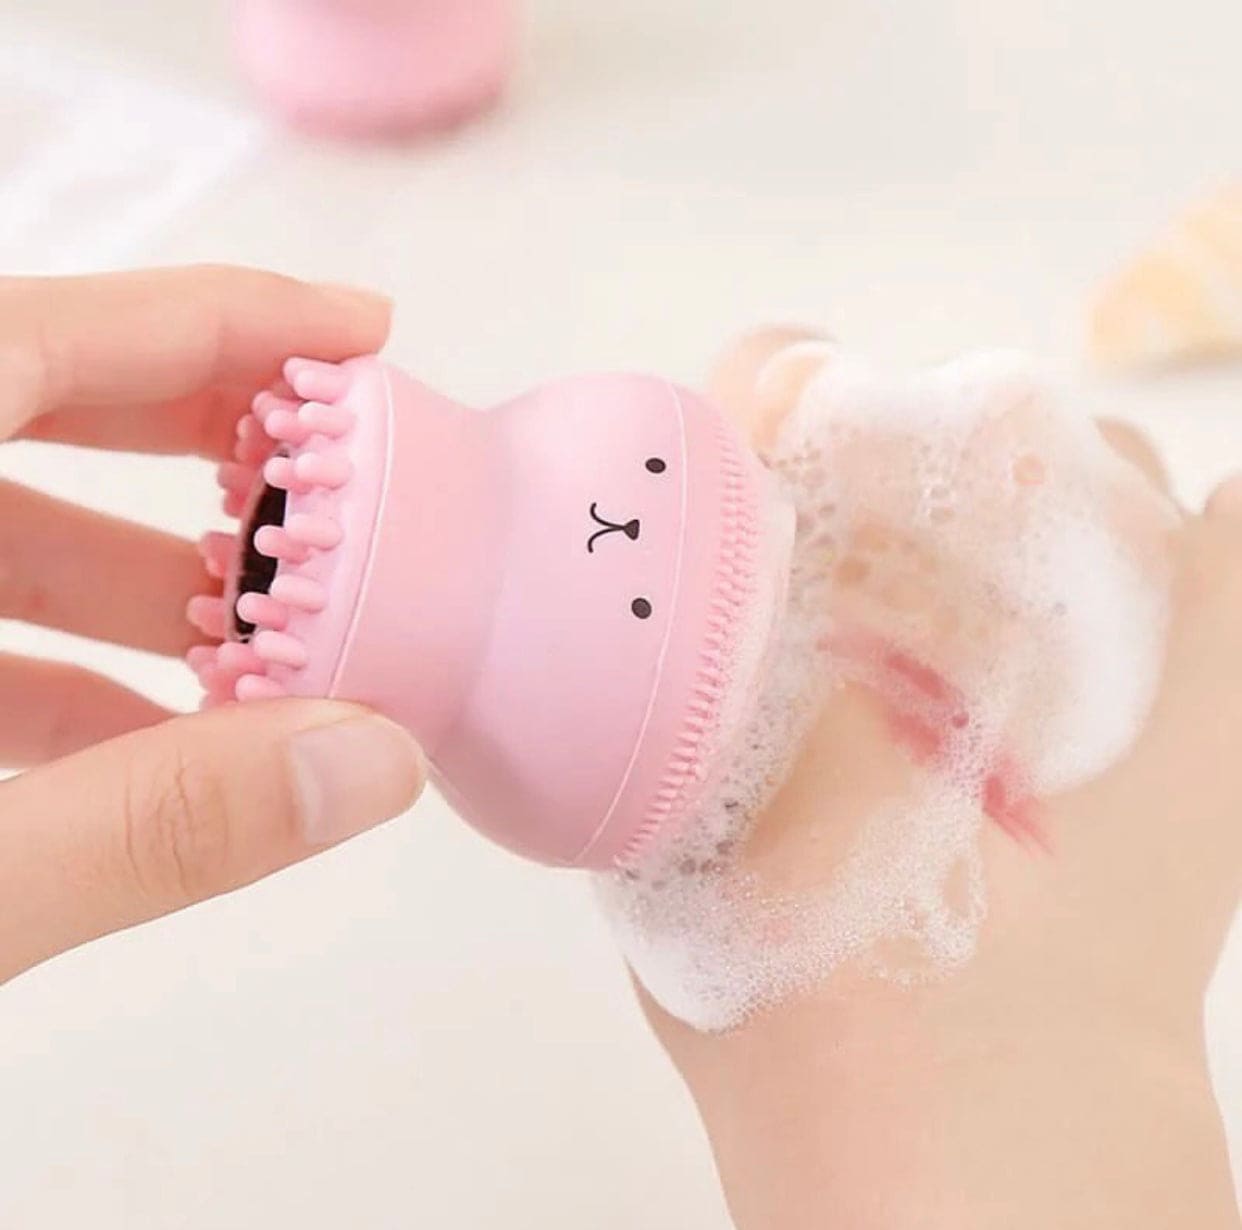 Octopus Shape Blubber Silicon Cleaning Brush, Exfoliating Black Head Remover, Facial Deep Cleansing Face Wash Bath Brushes